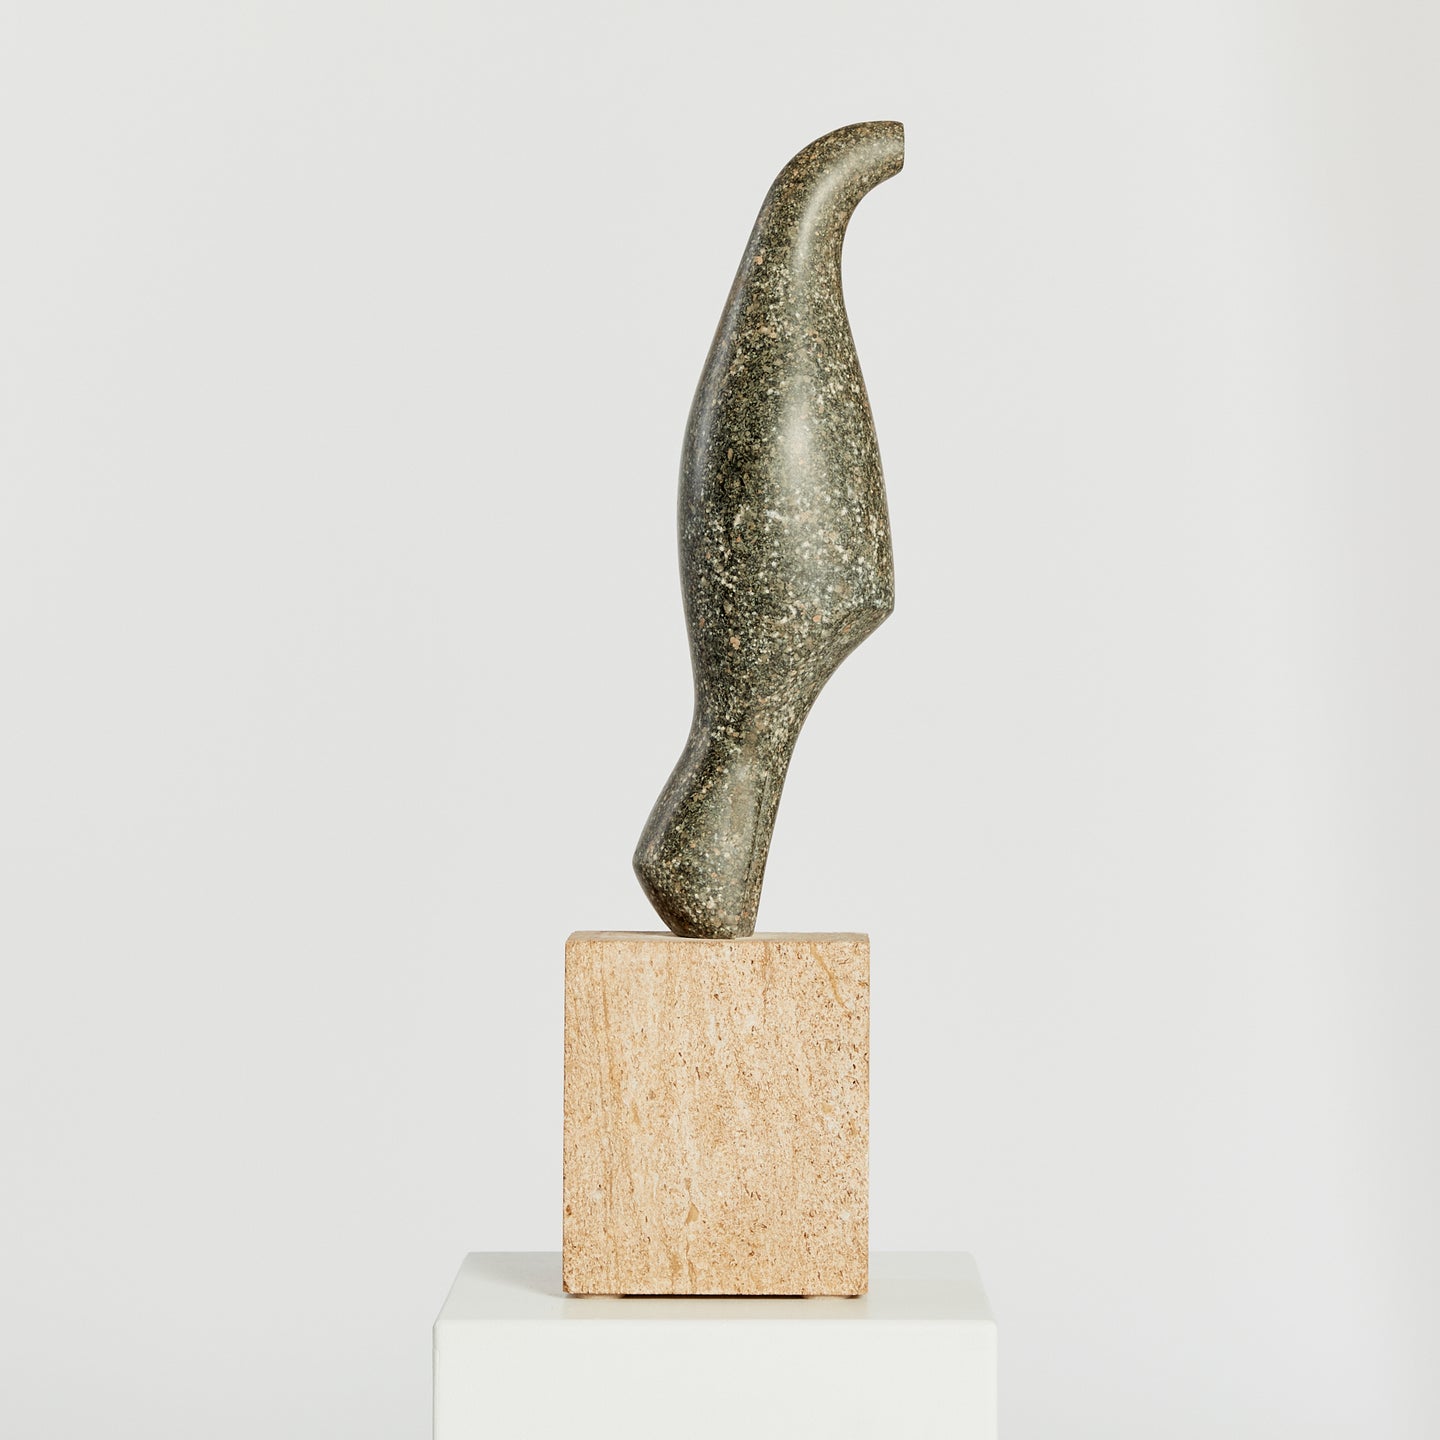 Granite bird sculpture, with contrasting stone base